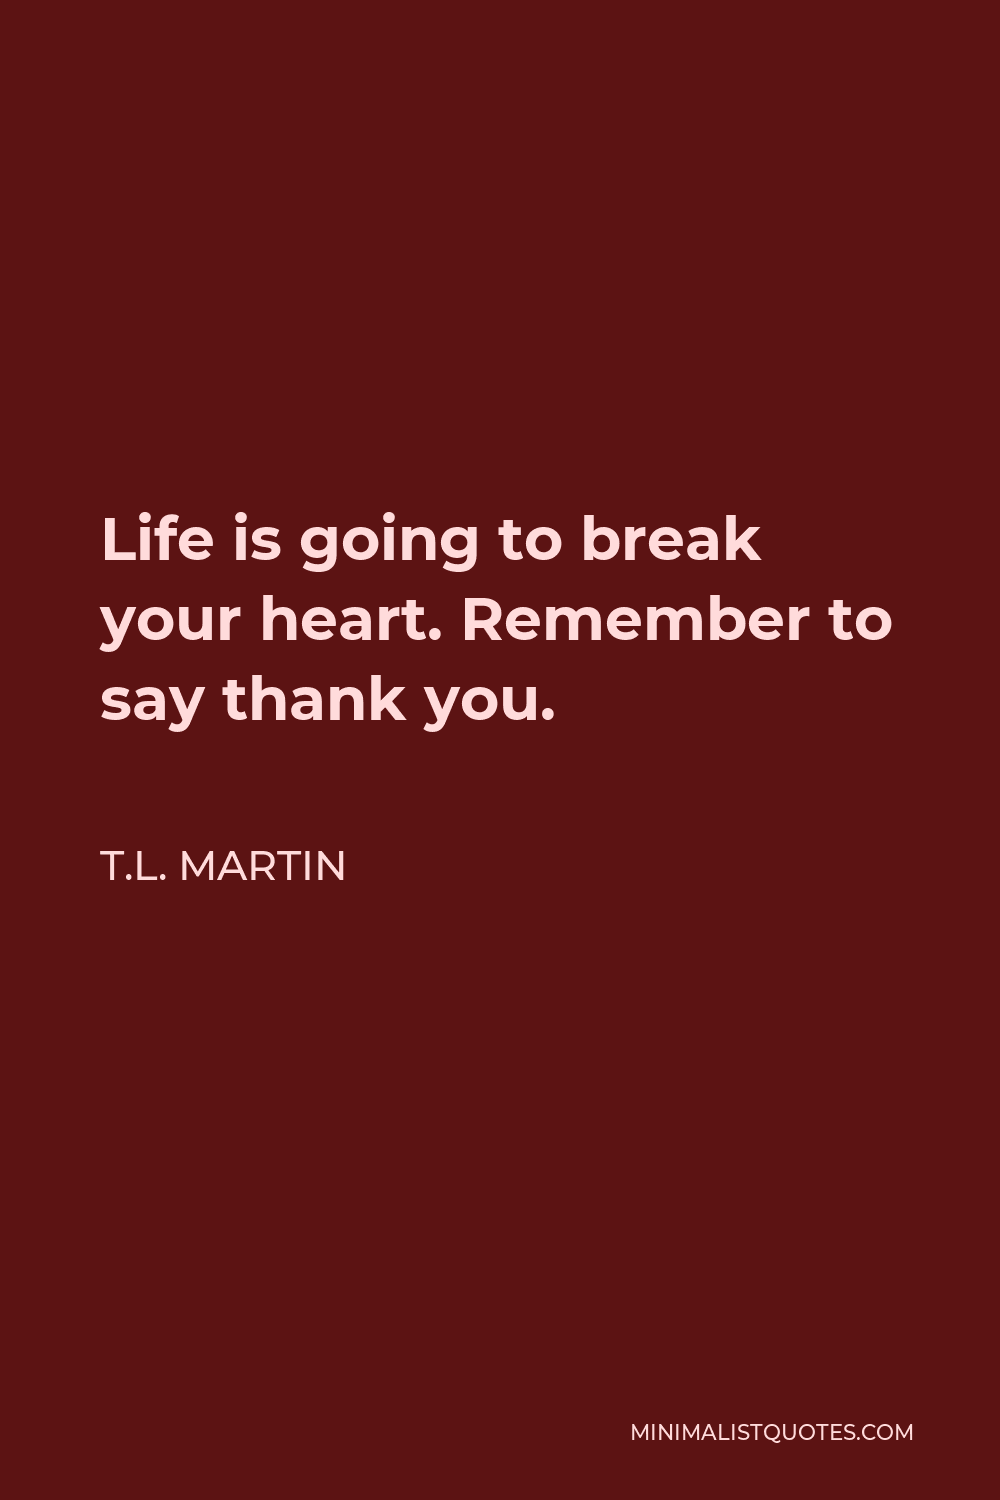 T.L. Martin Quote - Life is going to break your heart. Remember to say thank you.